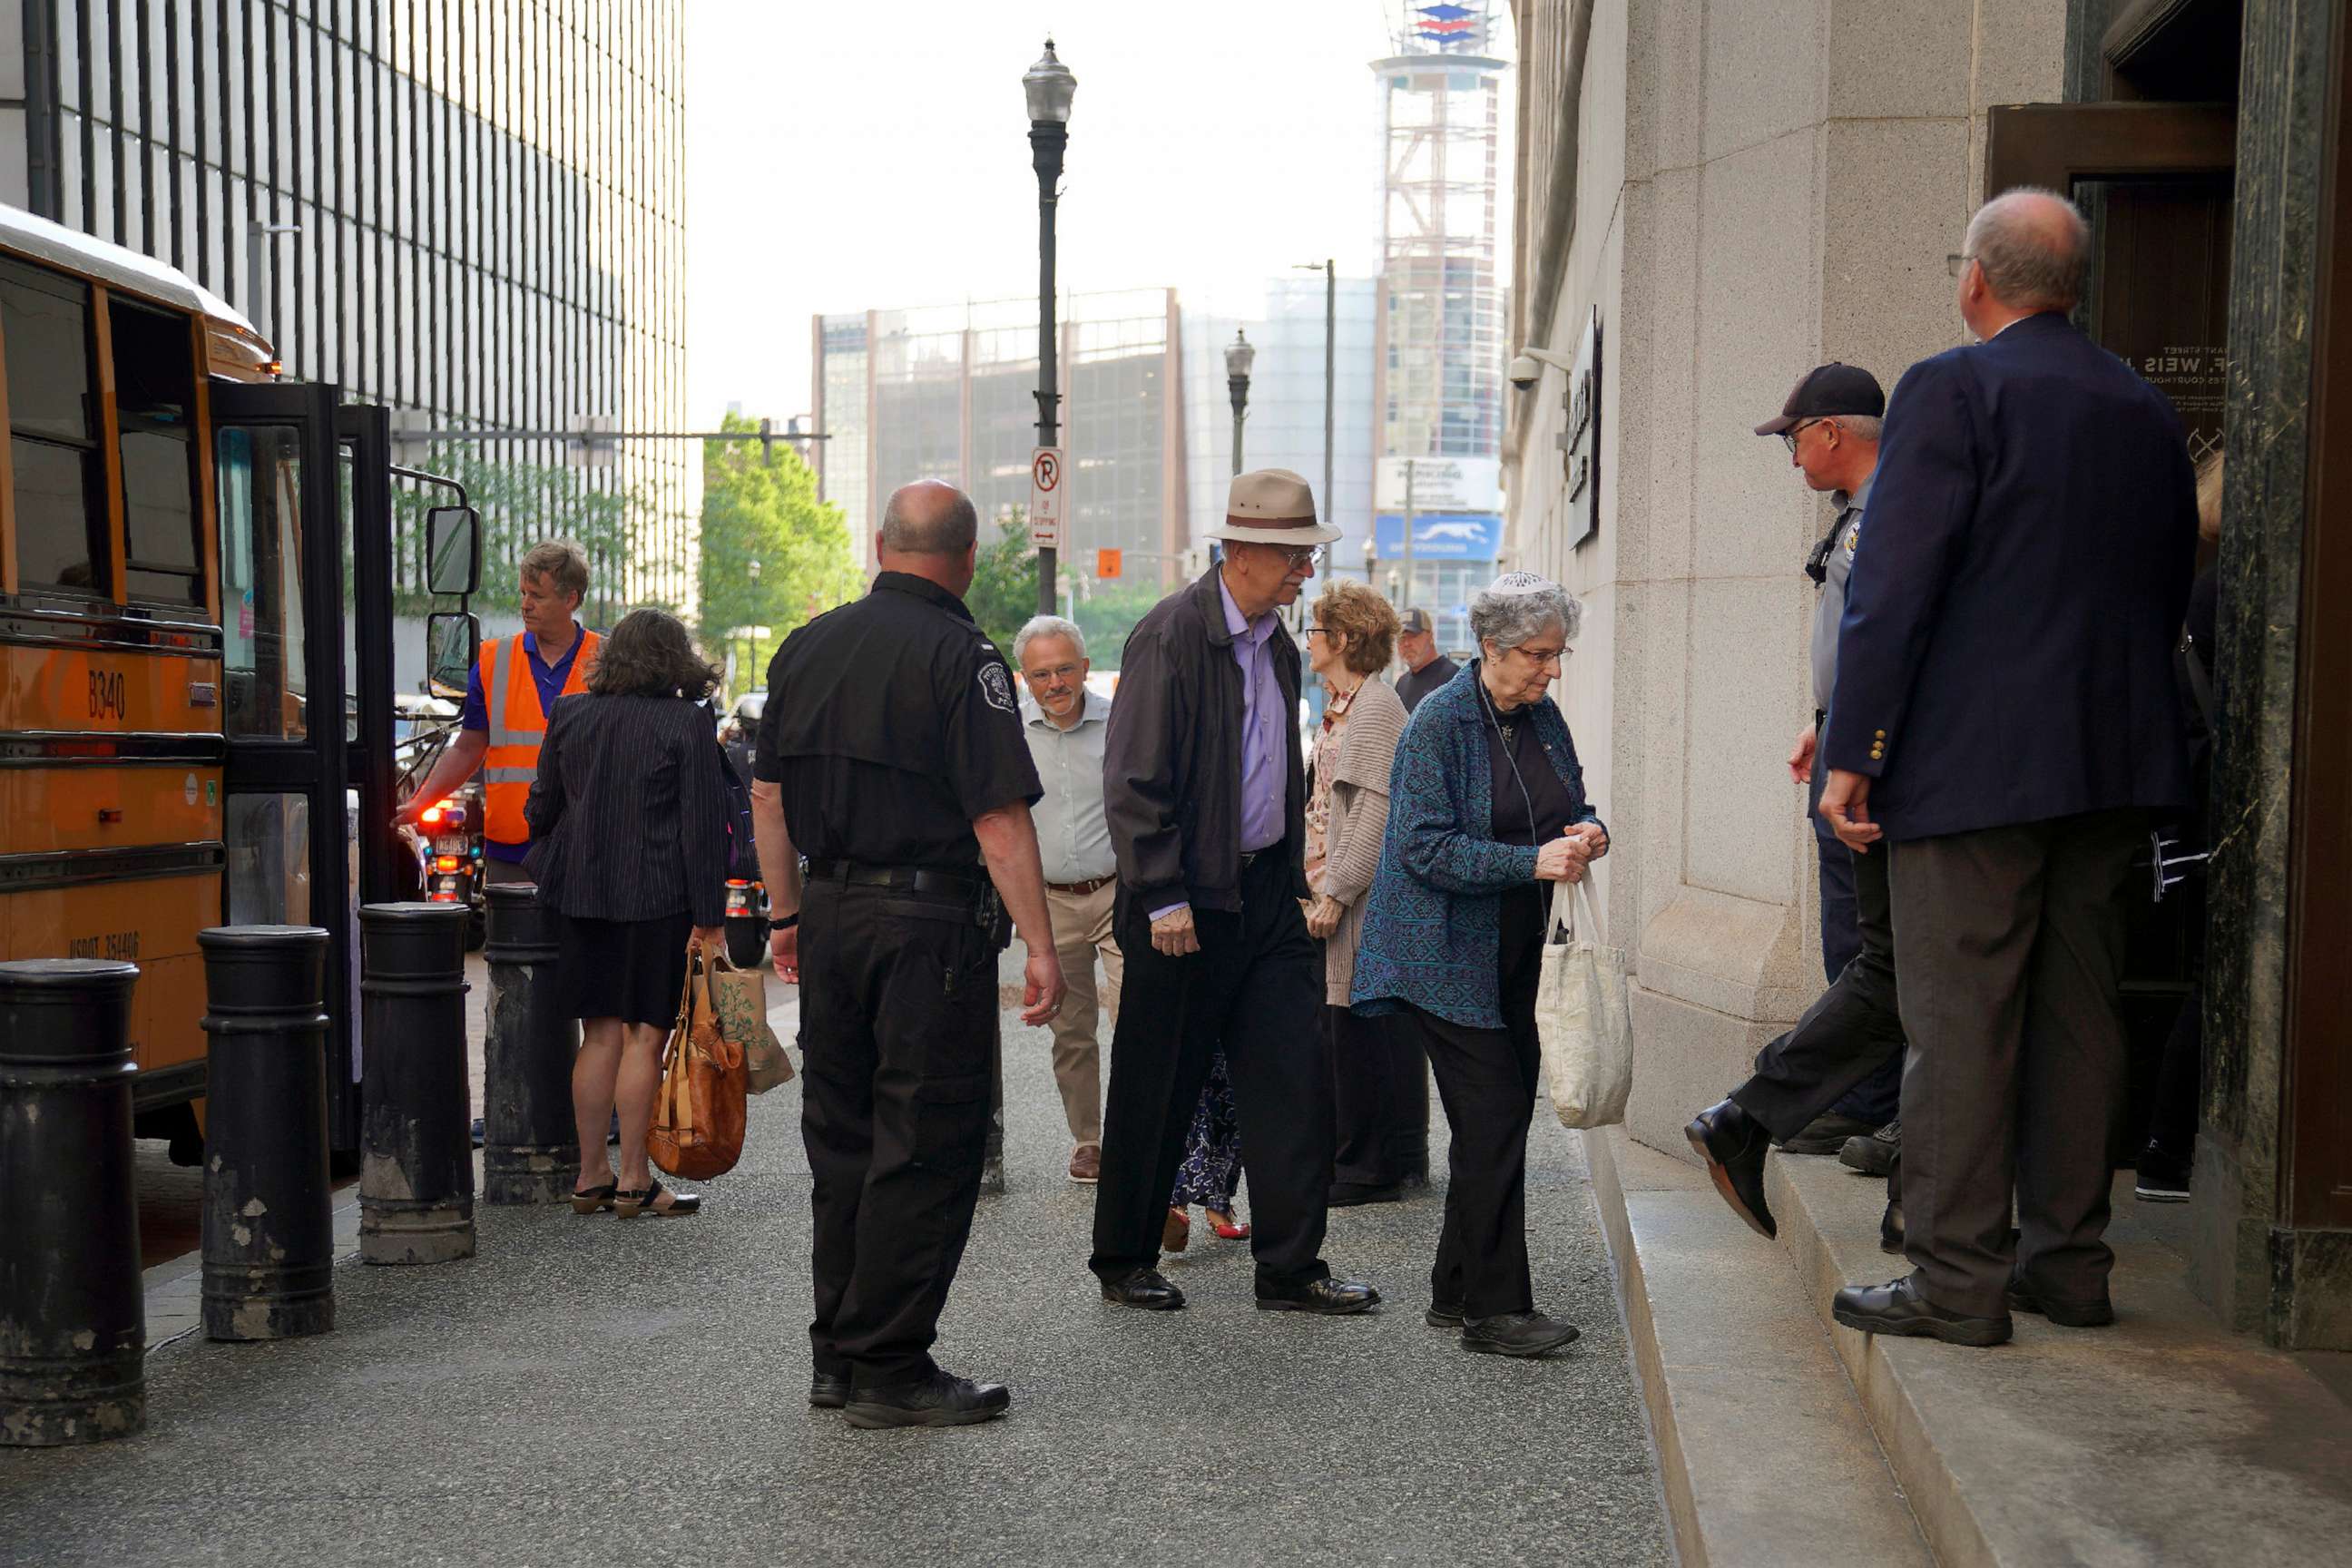 PHOTO: Members of Pittsburgh's Jewish community enter the Federal courthouse in Pittsburgh for the first day of trial for Robert Bowers, the suspect in the 2018 synagogue massacre, May 30, 2023, in Pittsburgh.